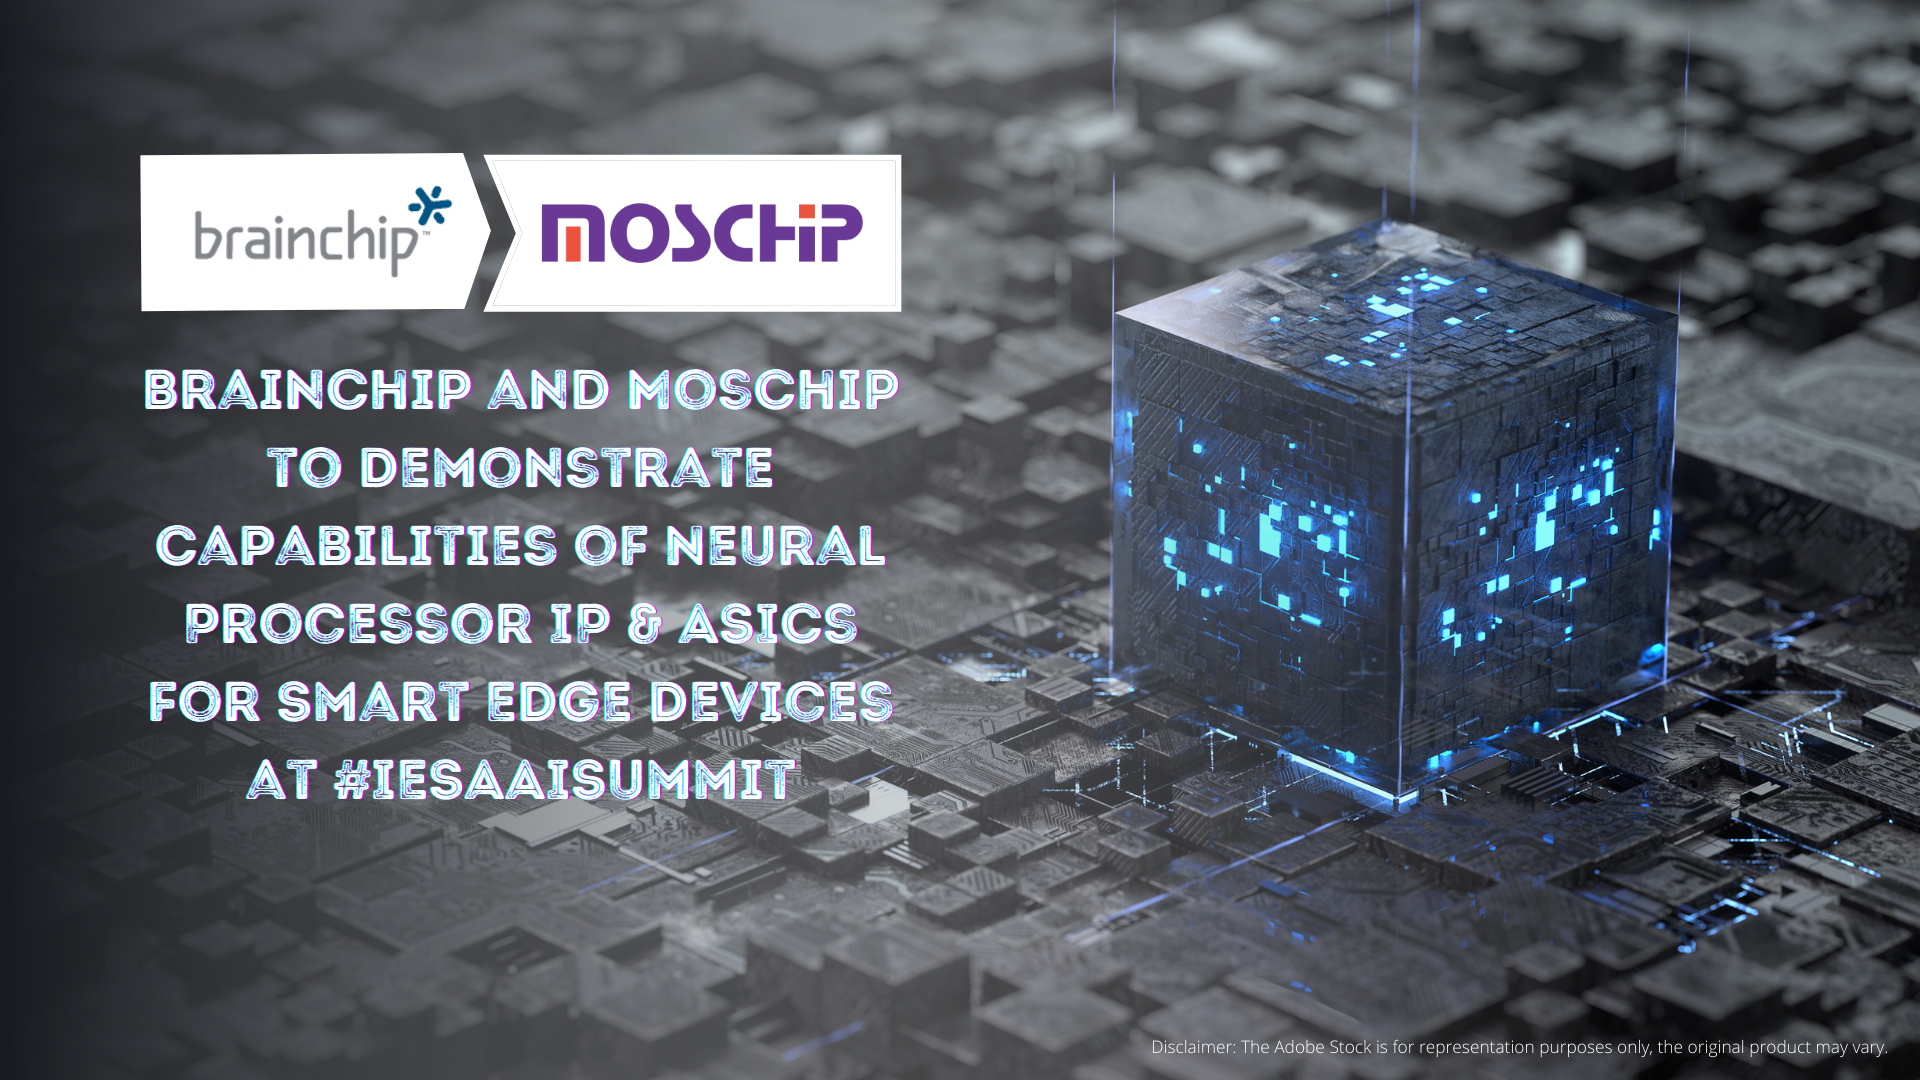 BrainChip-and-MosChip-to-Demonstrate-Capabilities-of-Neural-Processor-IP-ASICs-for-Smart-Edge-...png